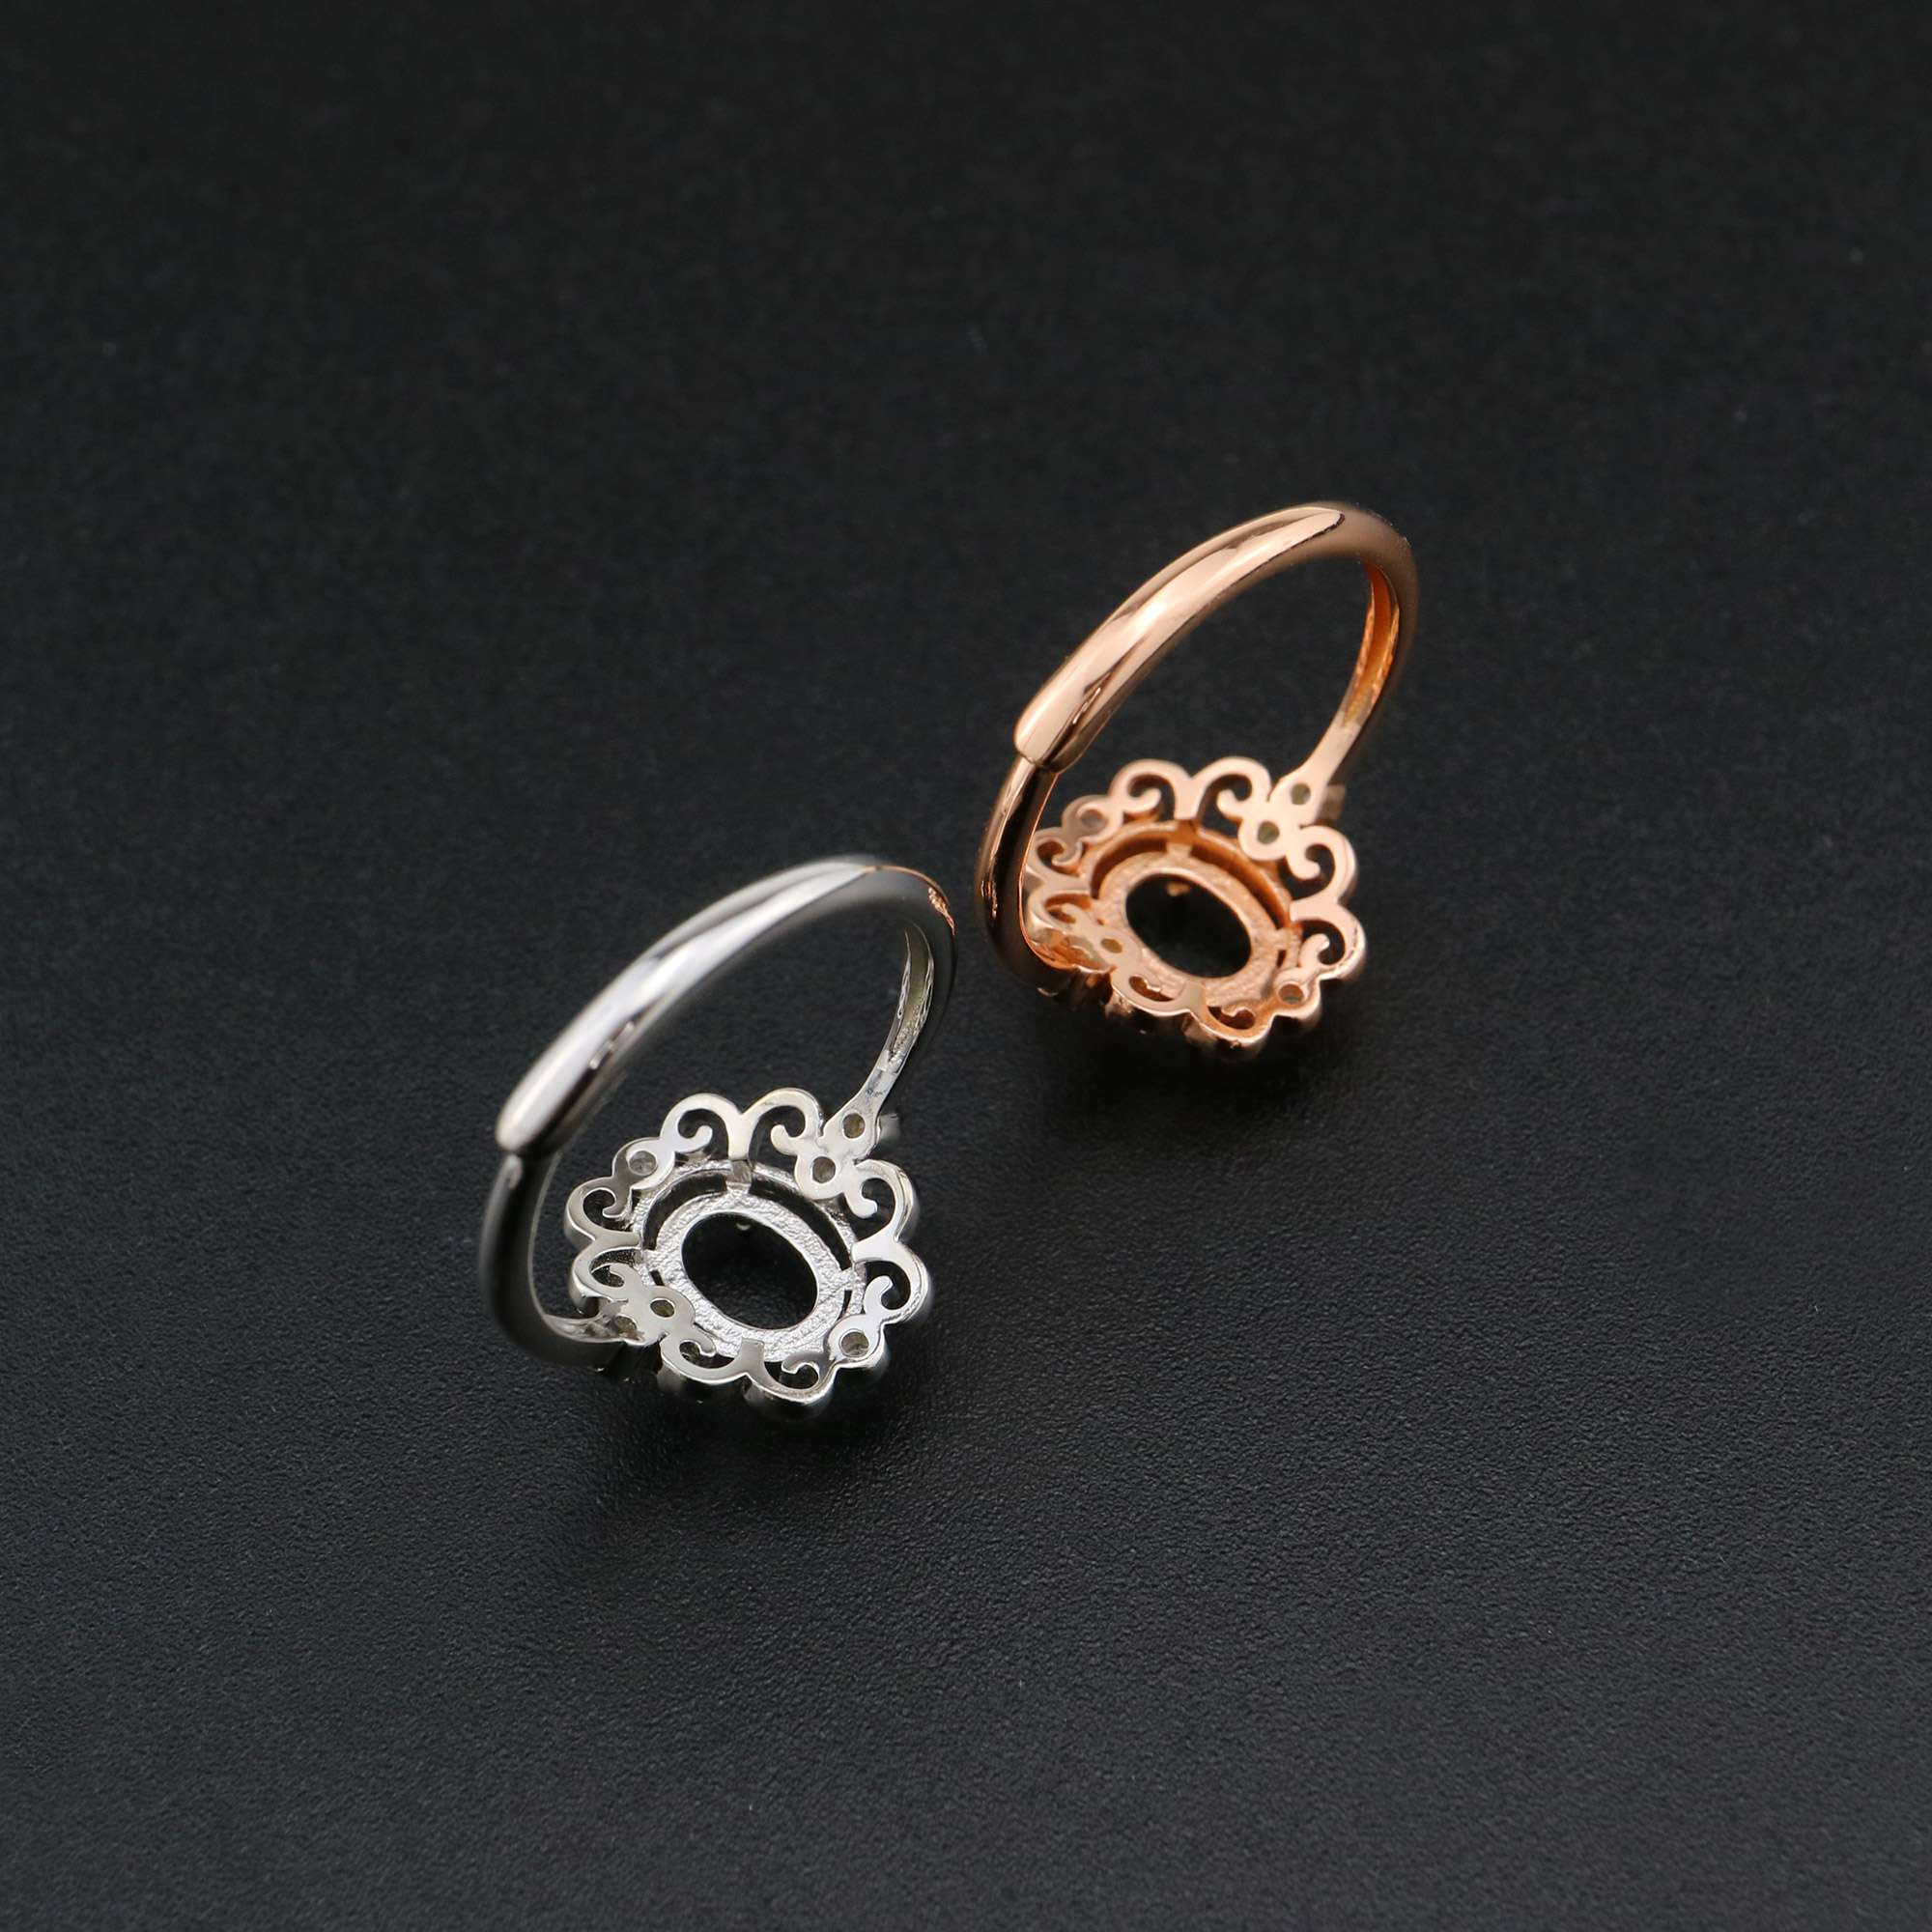 1Pcs Oval Ring Settings Adjustable for Gemstone Rose Gold Plated Solid 925 Sterling Silver DIY Bezel Tray Supplies 1224066 - Click Image to Close